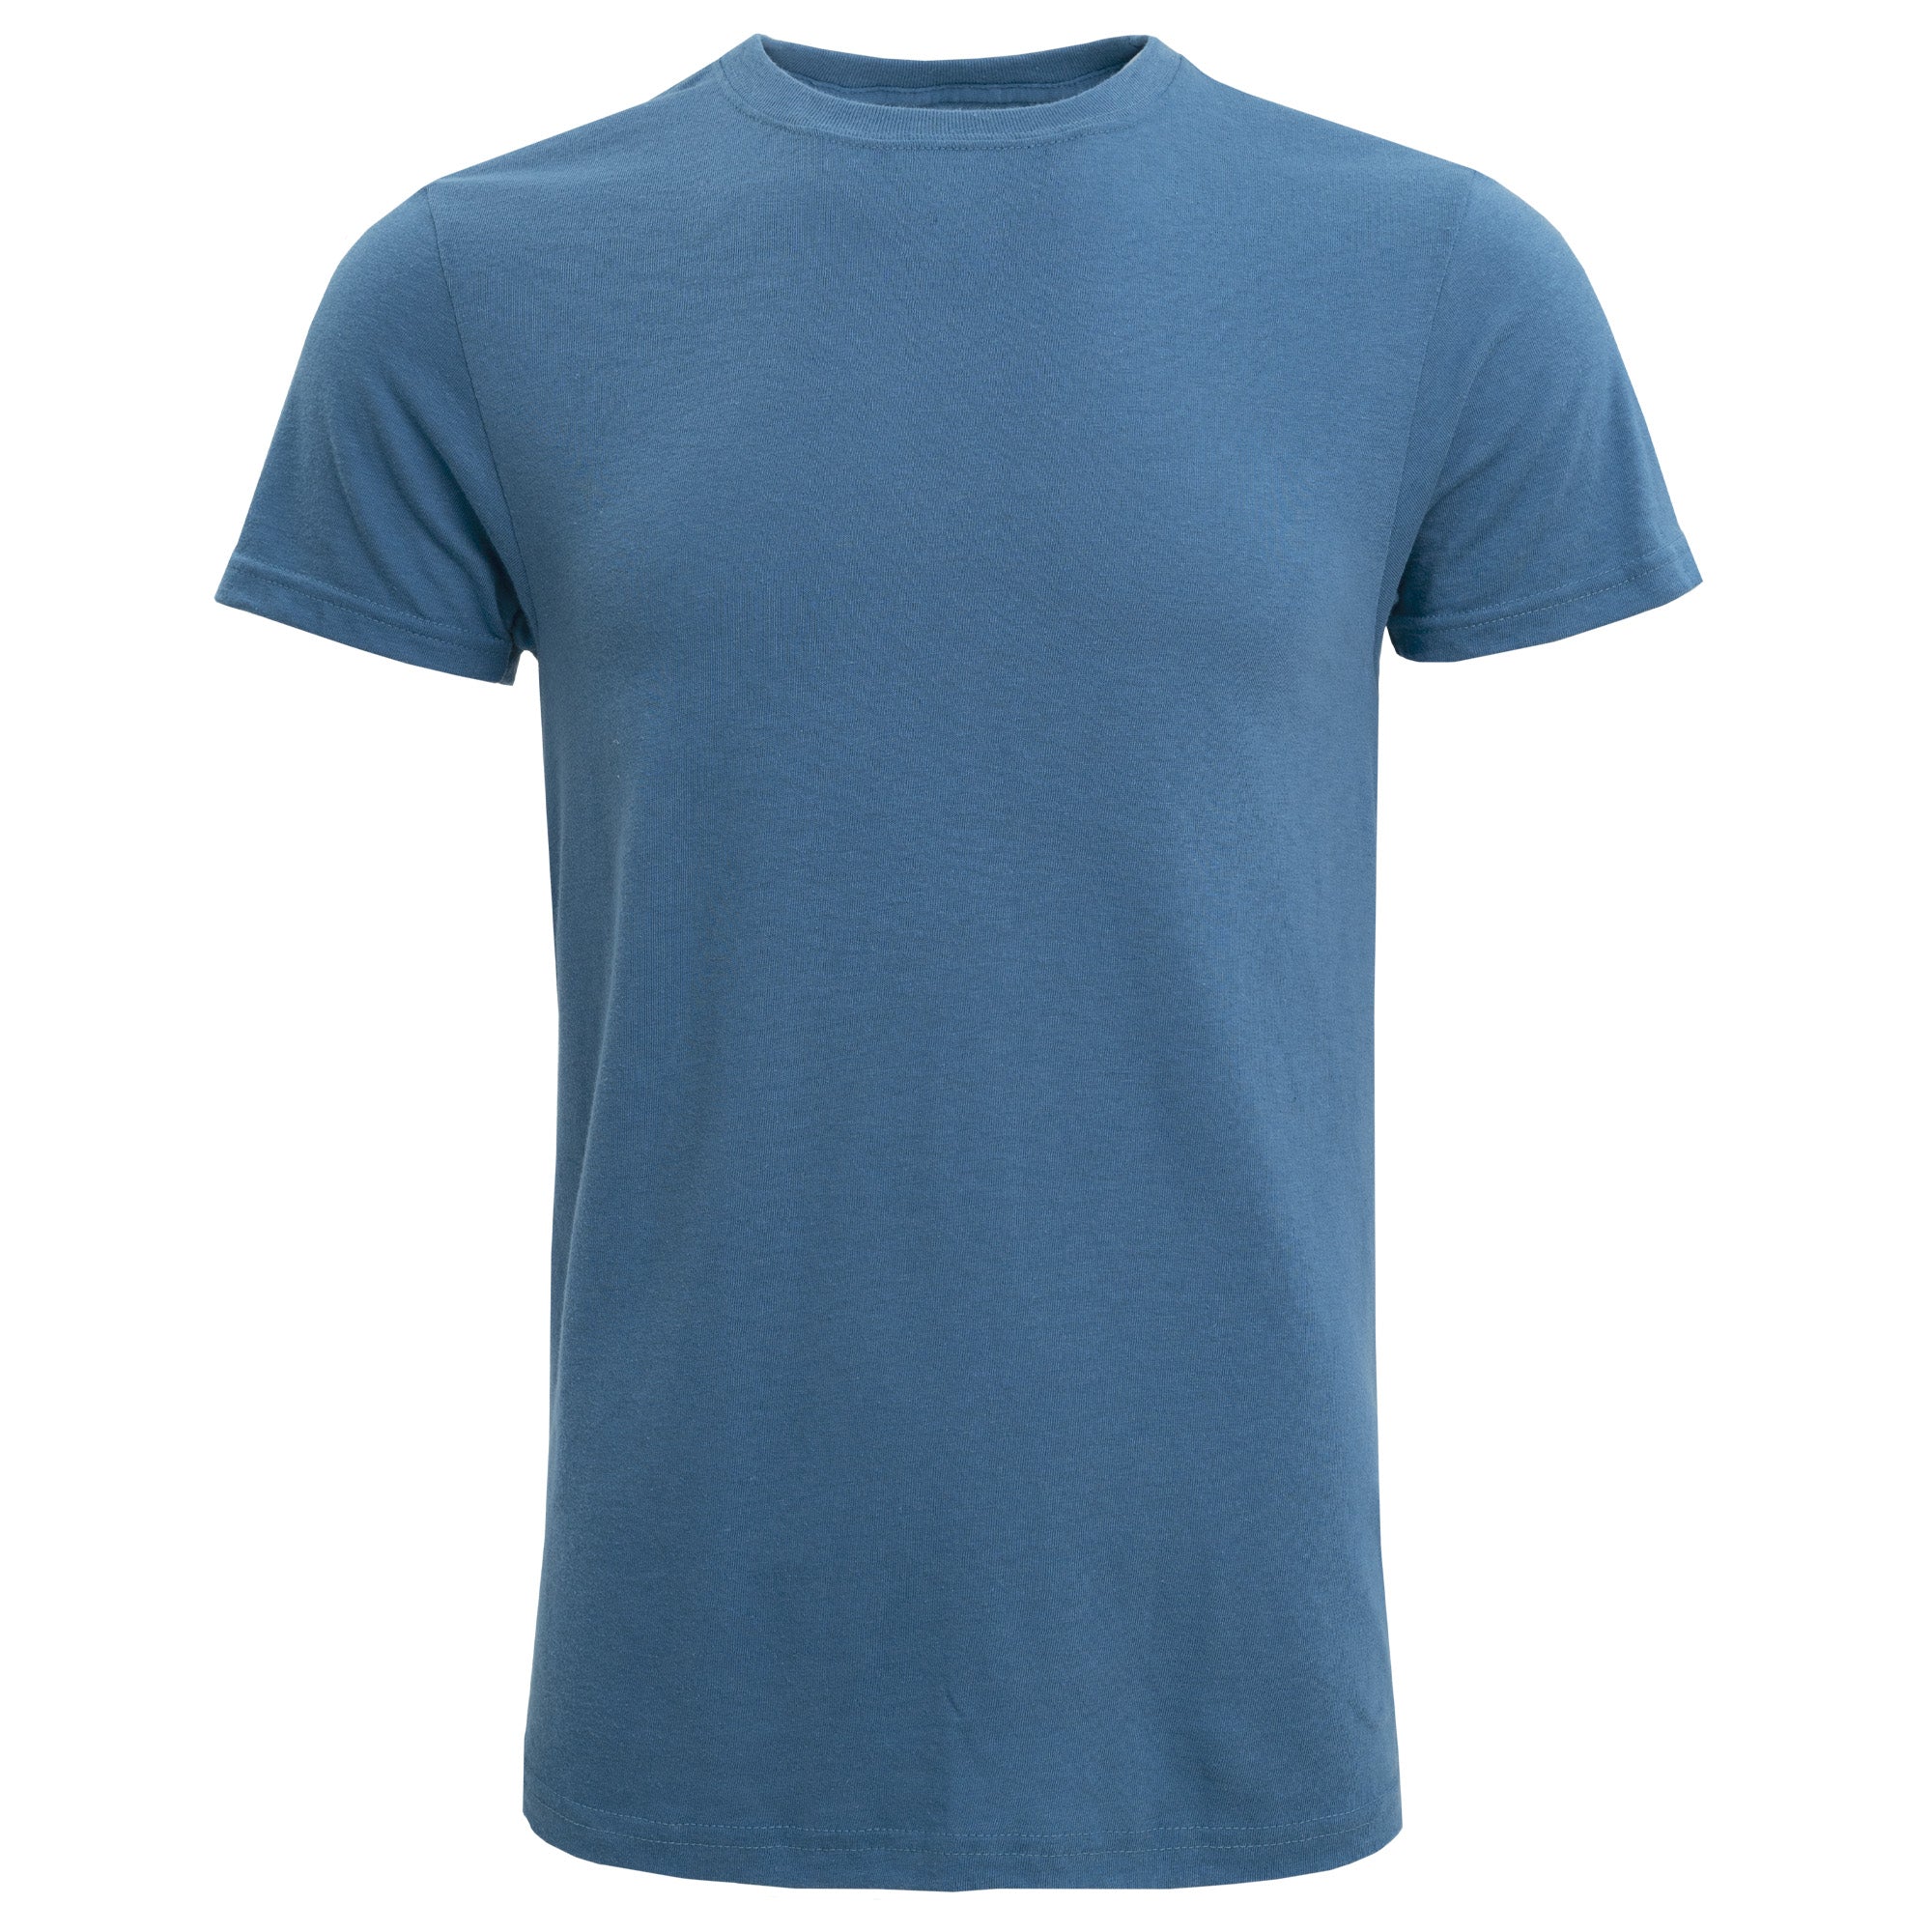 Trendy and Organic 65 polyester 35 cotton t shirt for All Seasons 